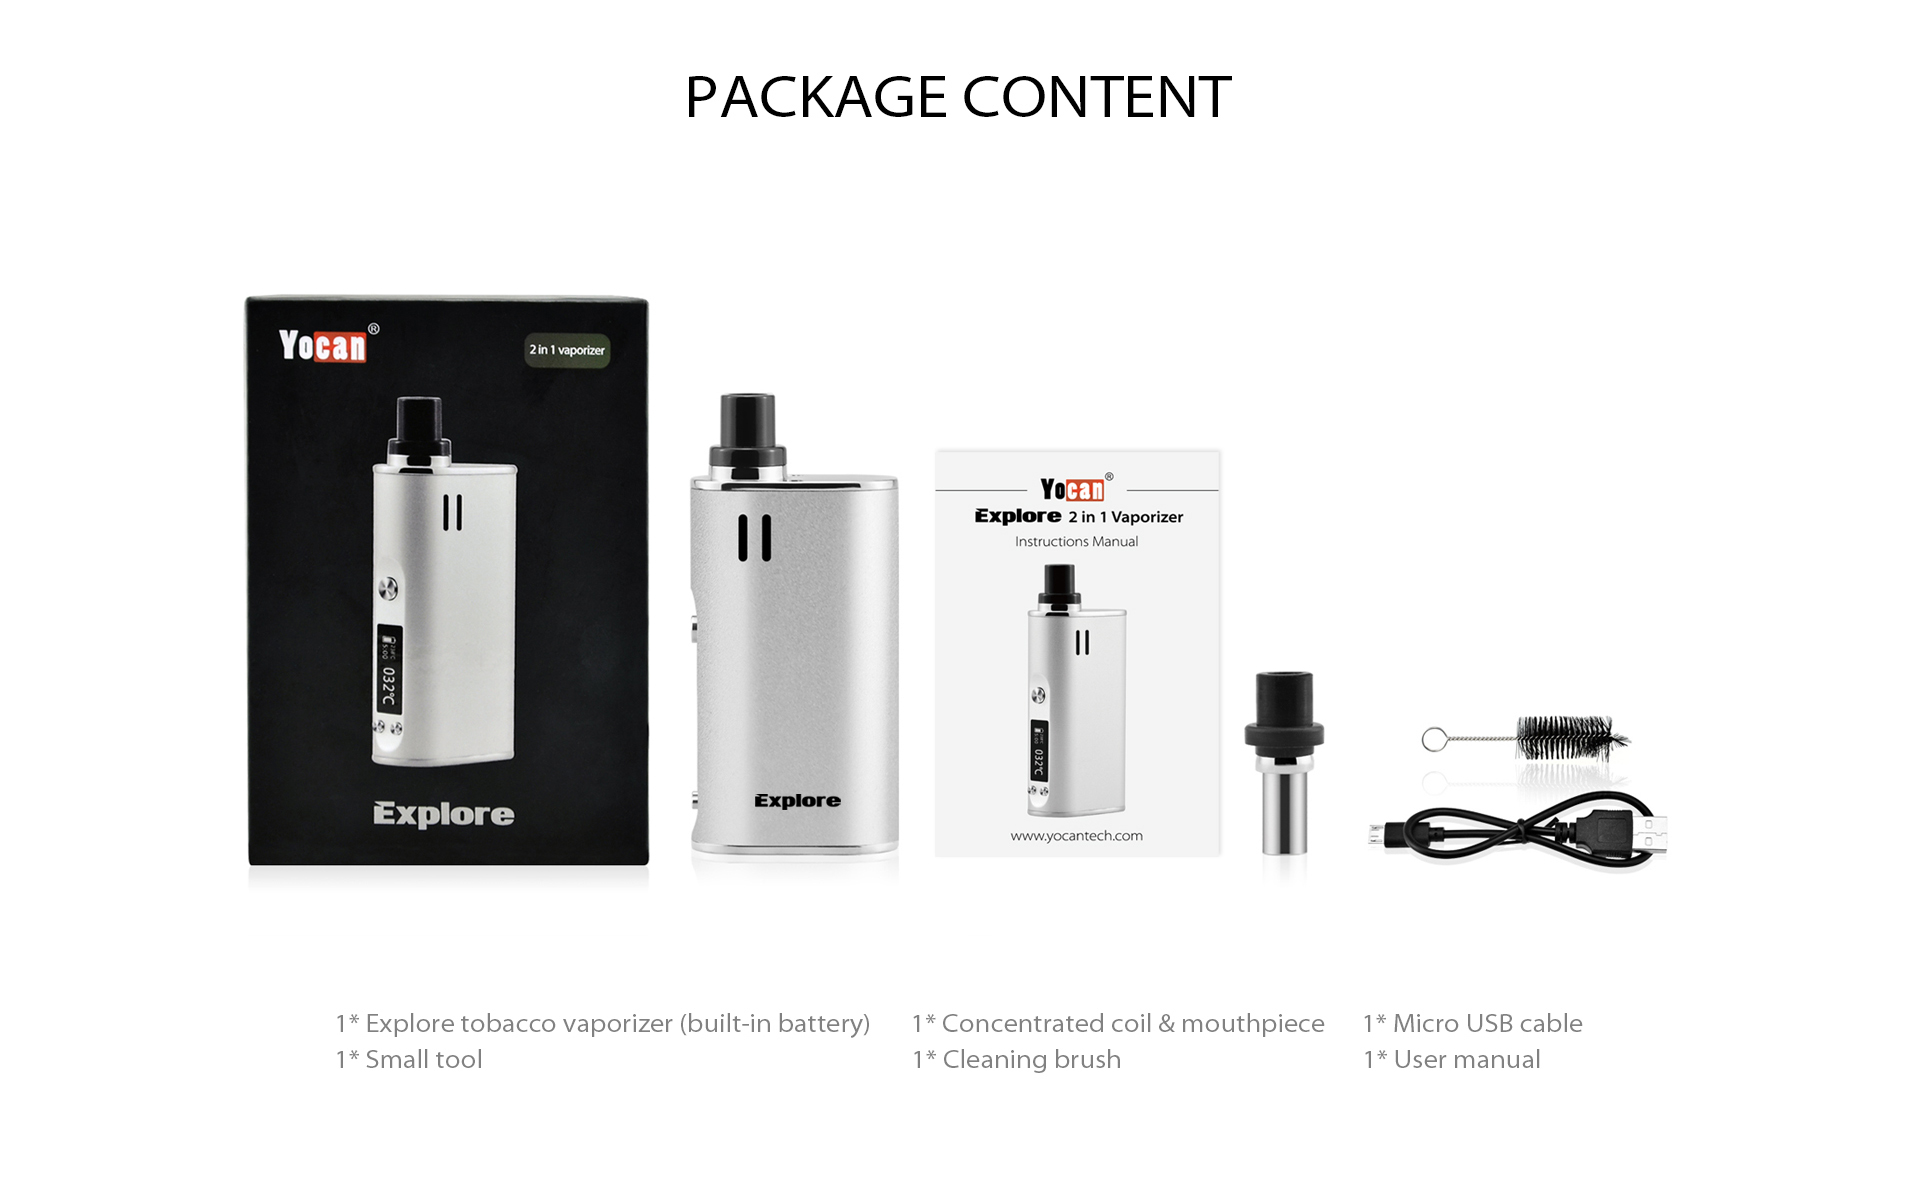 The Yocan Explore package content.